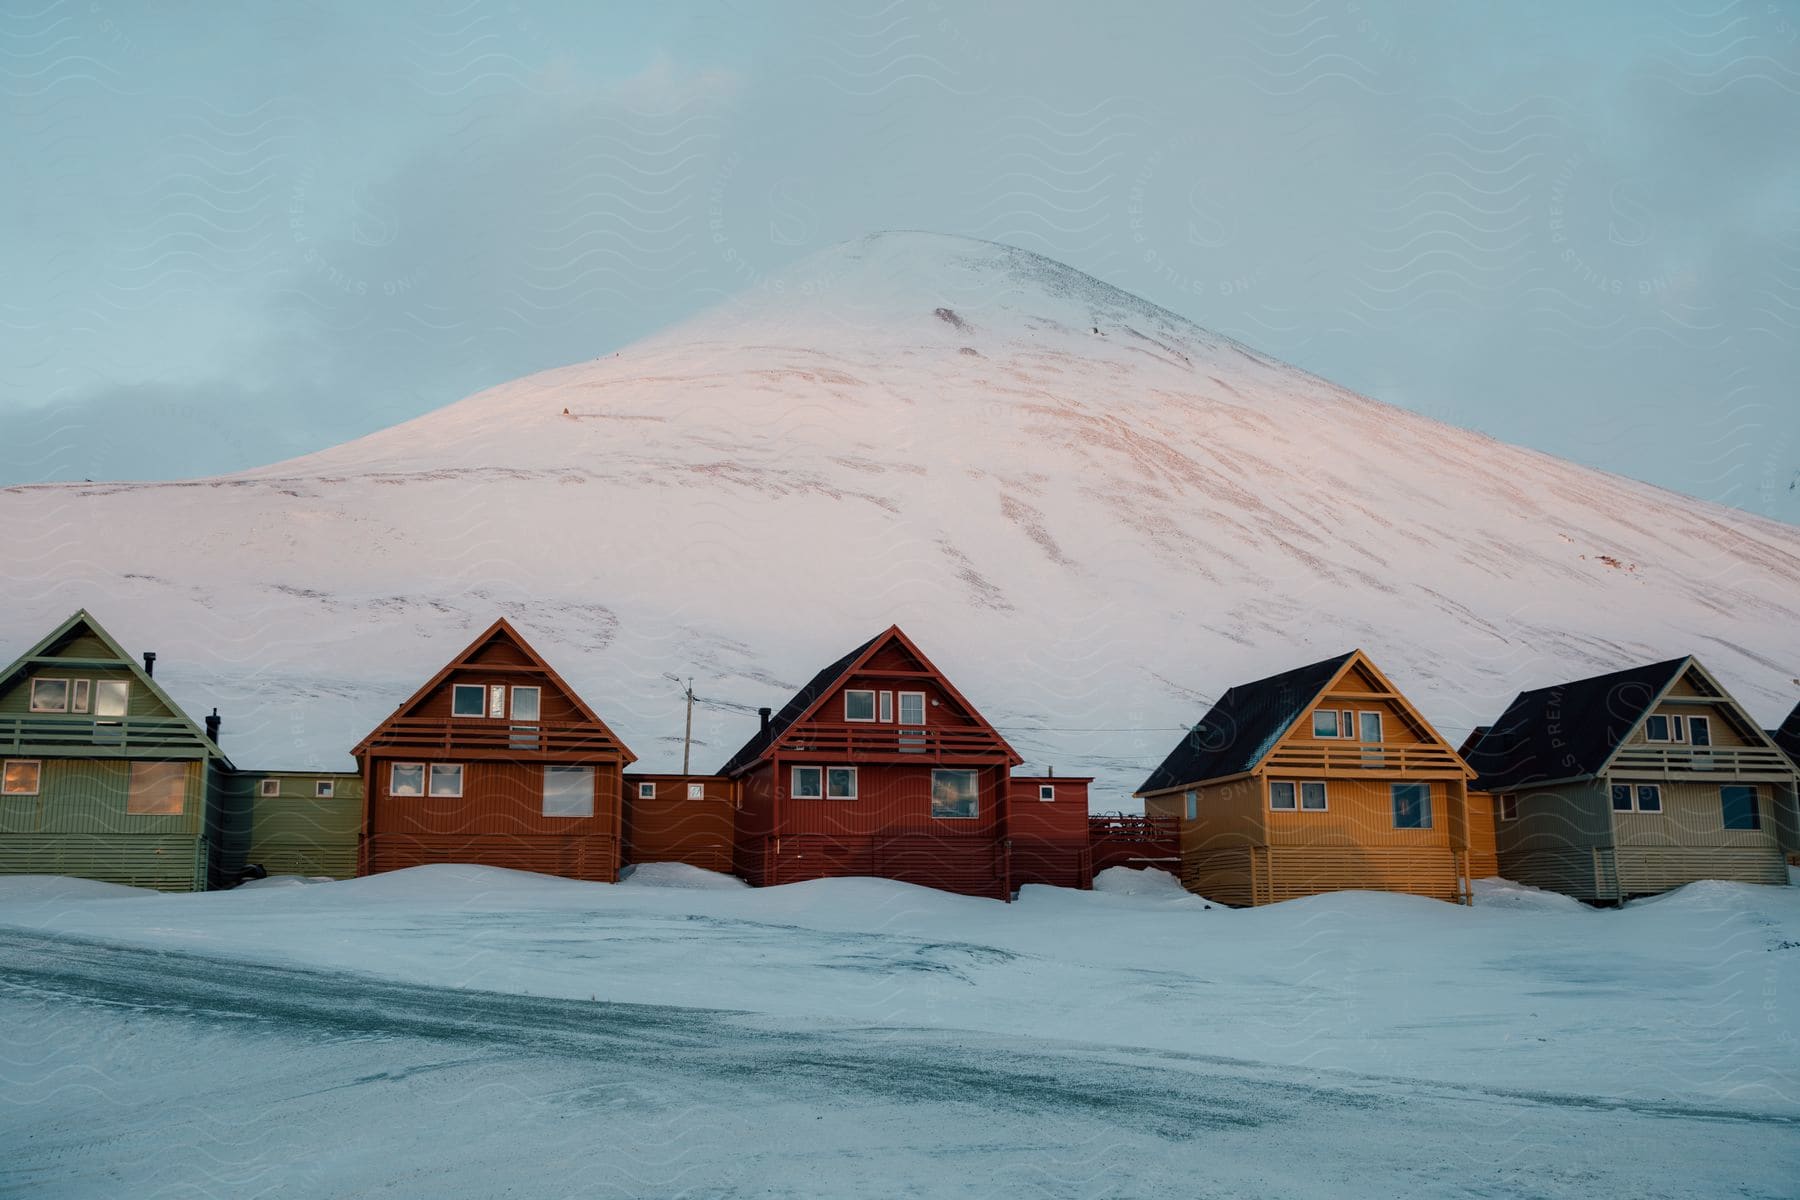 Houses in winter near the mountains